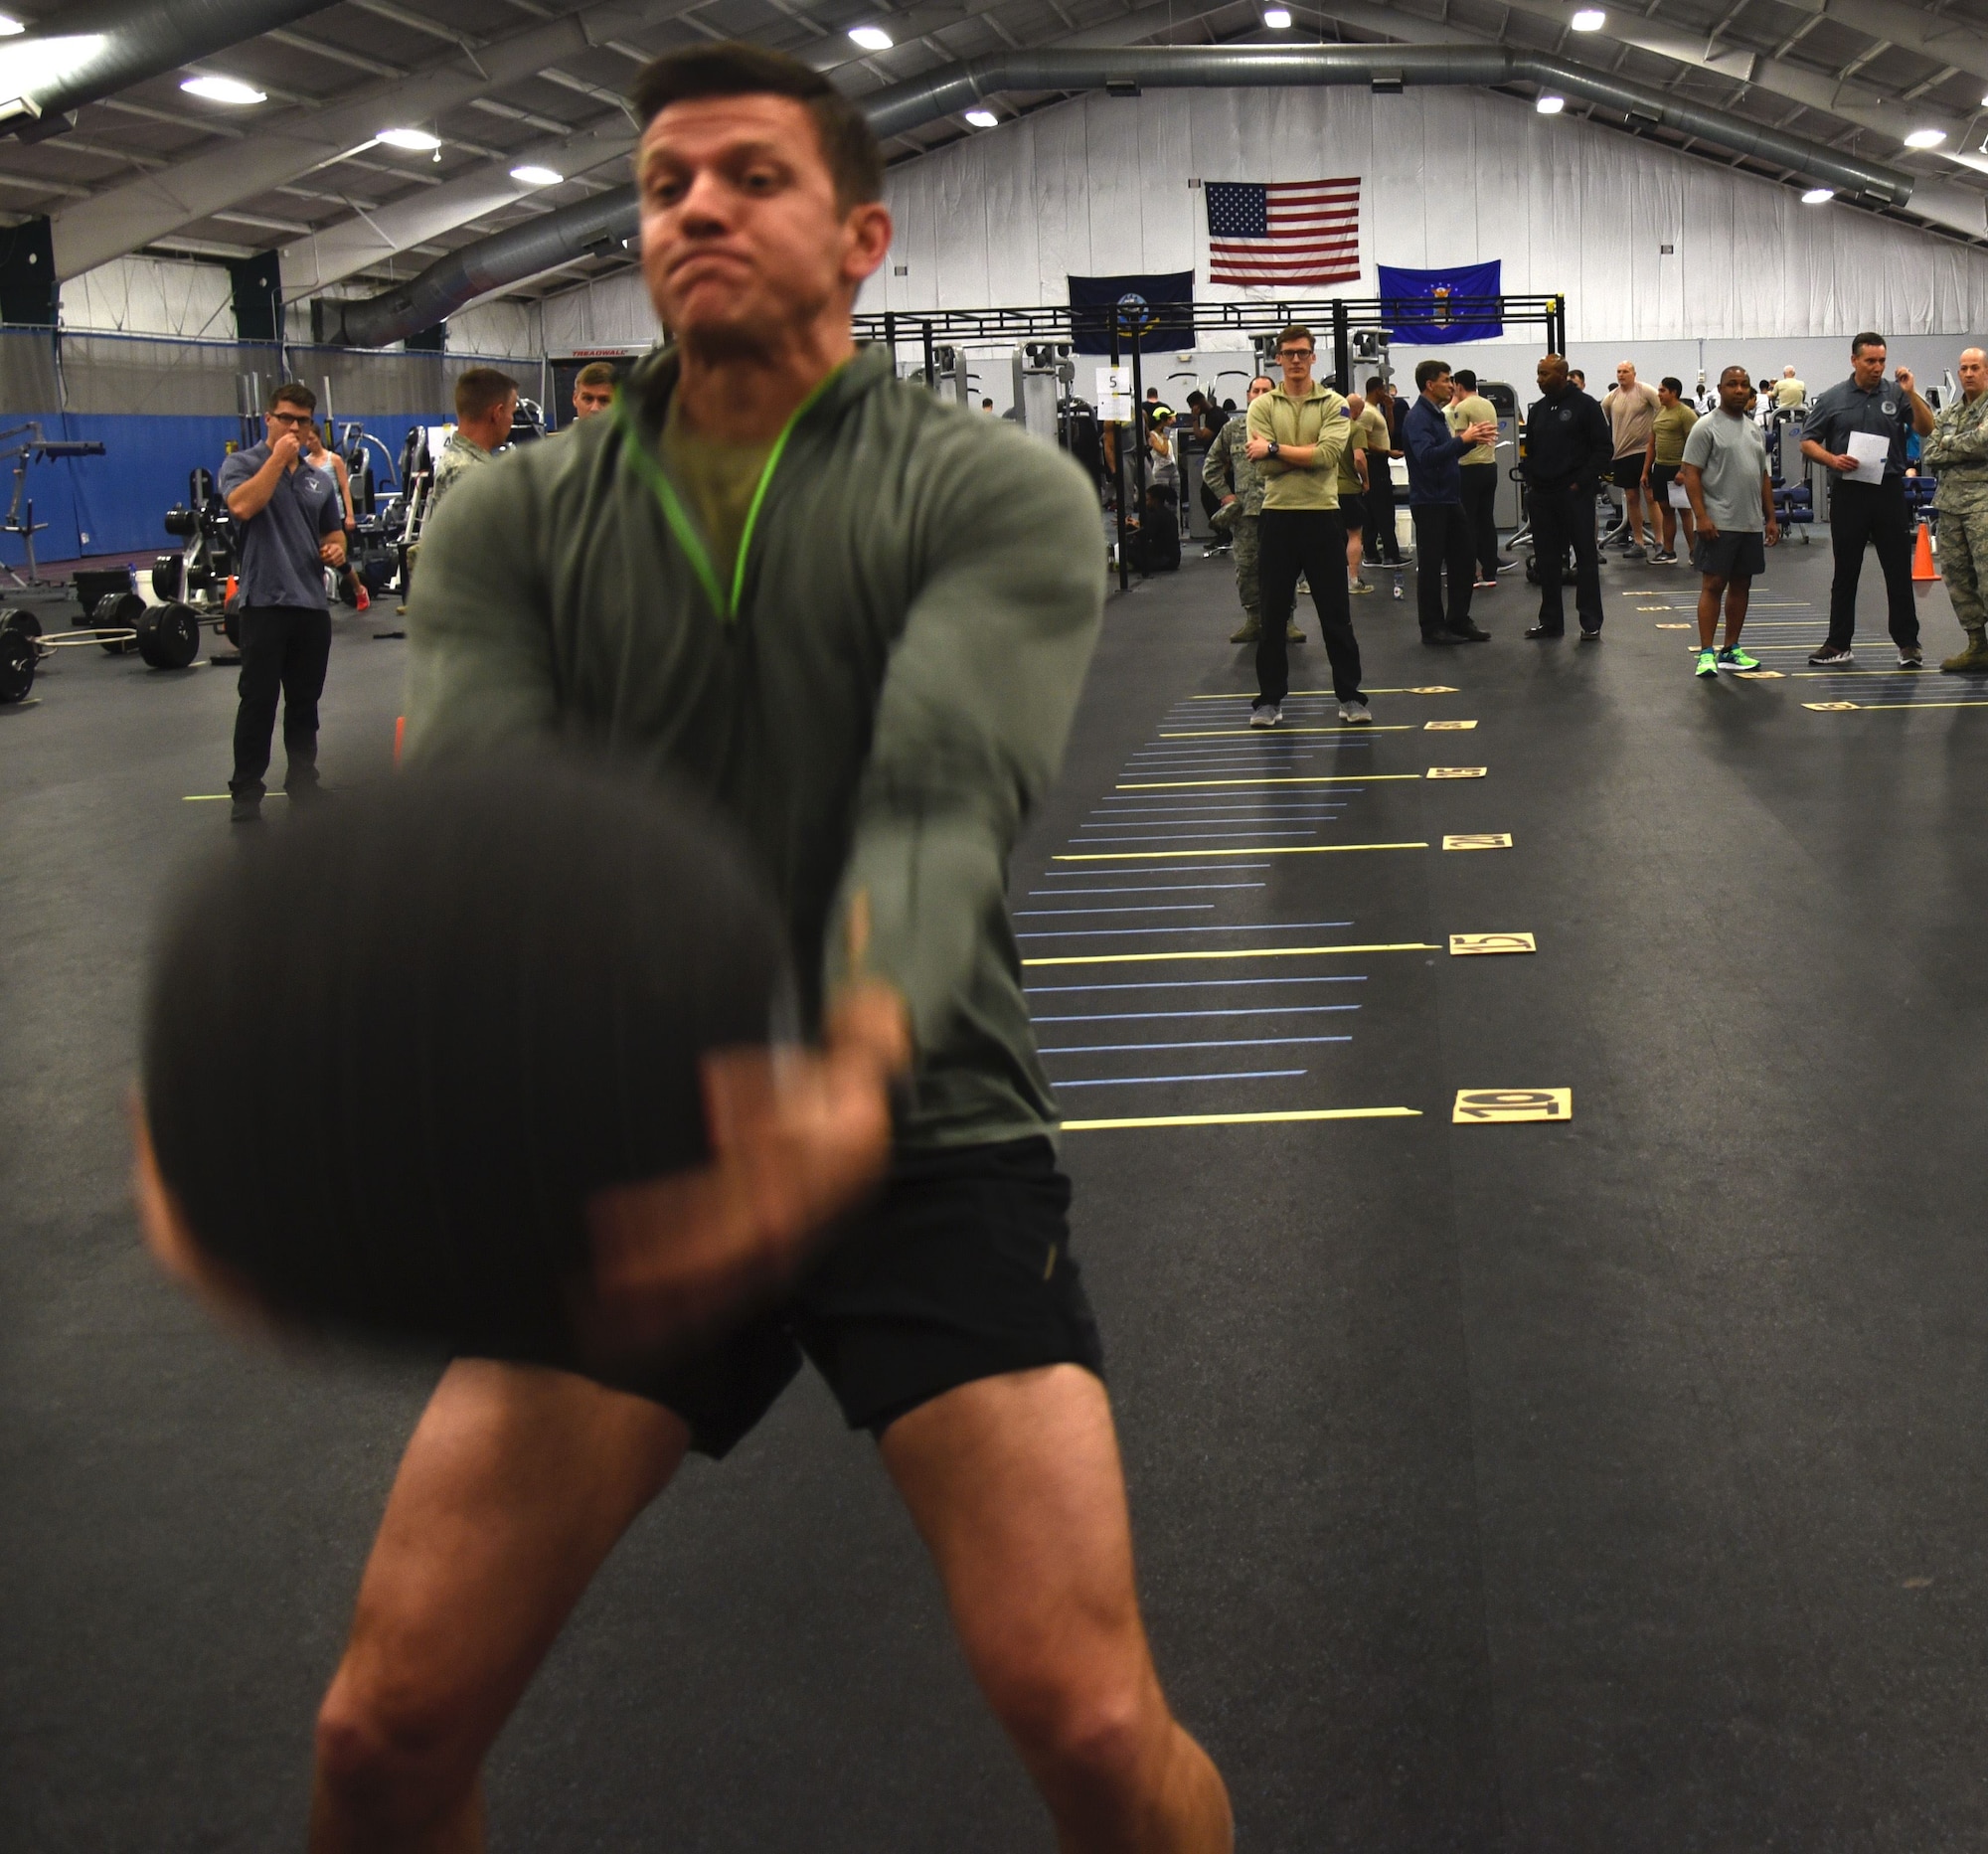 Master Sgt. Paul Foles, 17th Special Tactics Squadron, throws a medicine ball over his head during a strength and agility demonstration as part of the Air Force special operations community's new fitness assessment program at Joint Base Andrews, Md., Jan. 9, 2018. (U.S. Air Force photo by Staff Sgt. Joe Yanik)